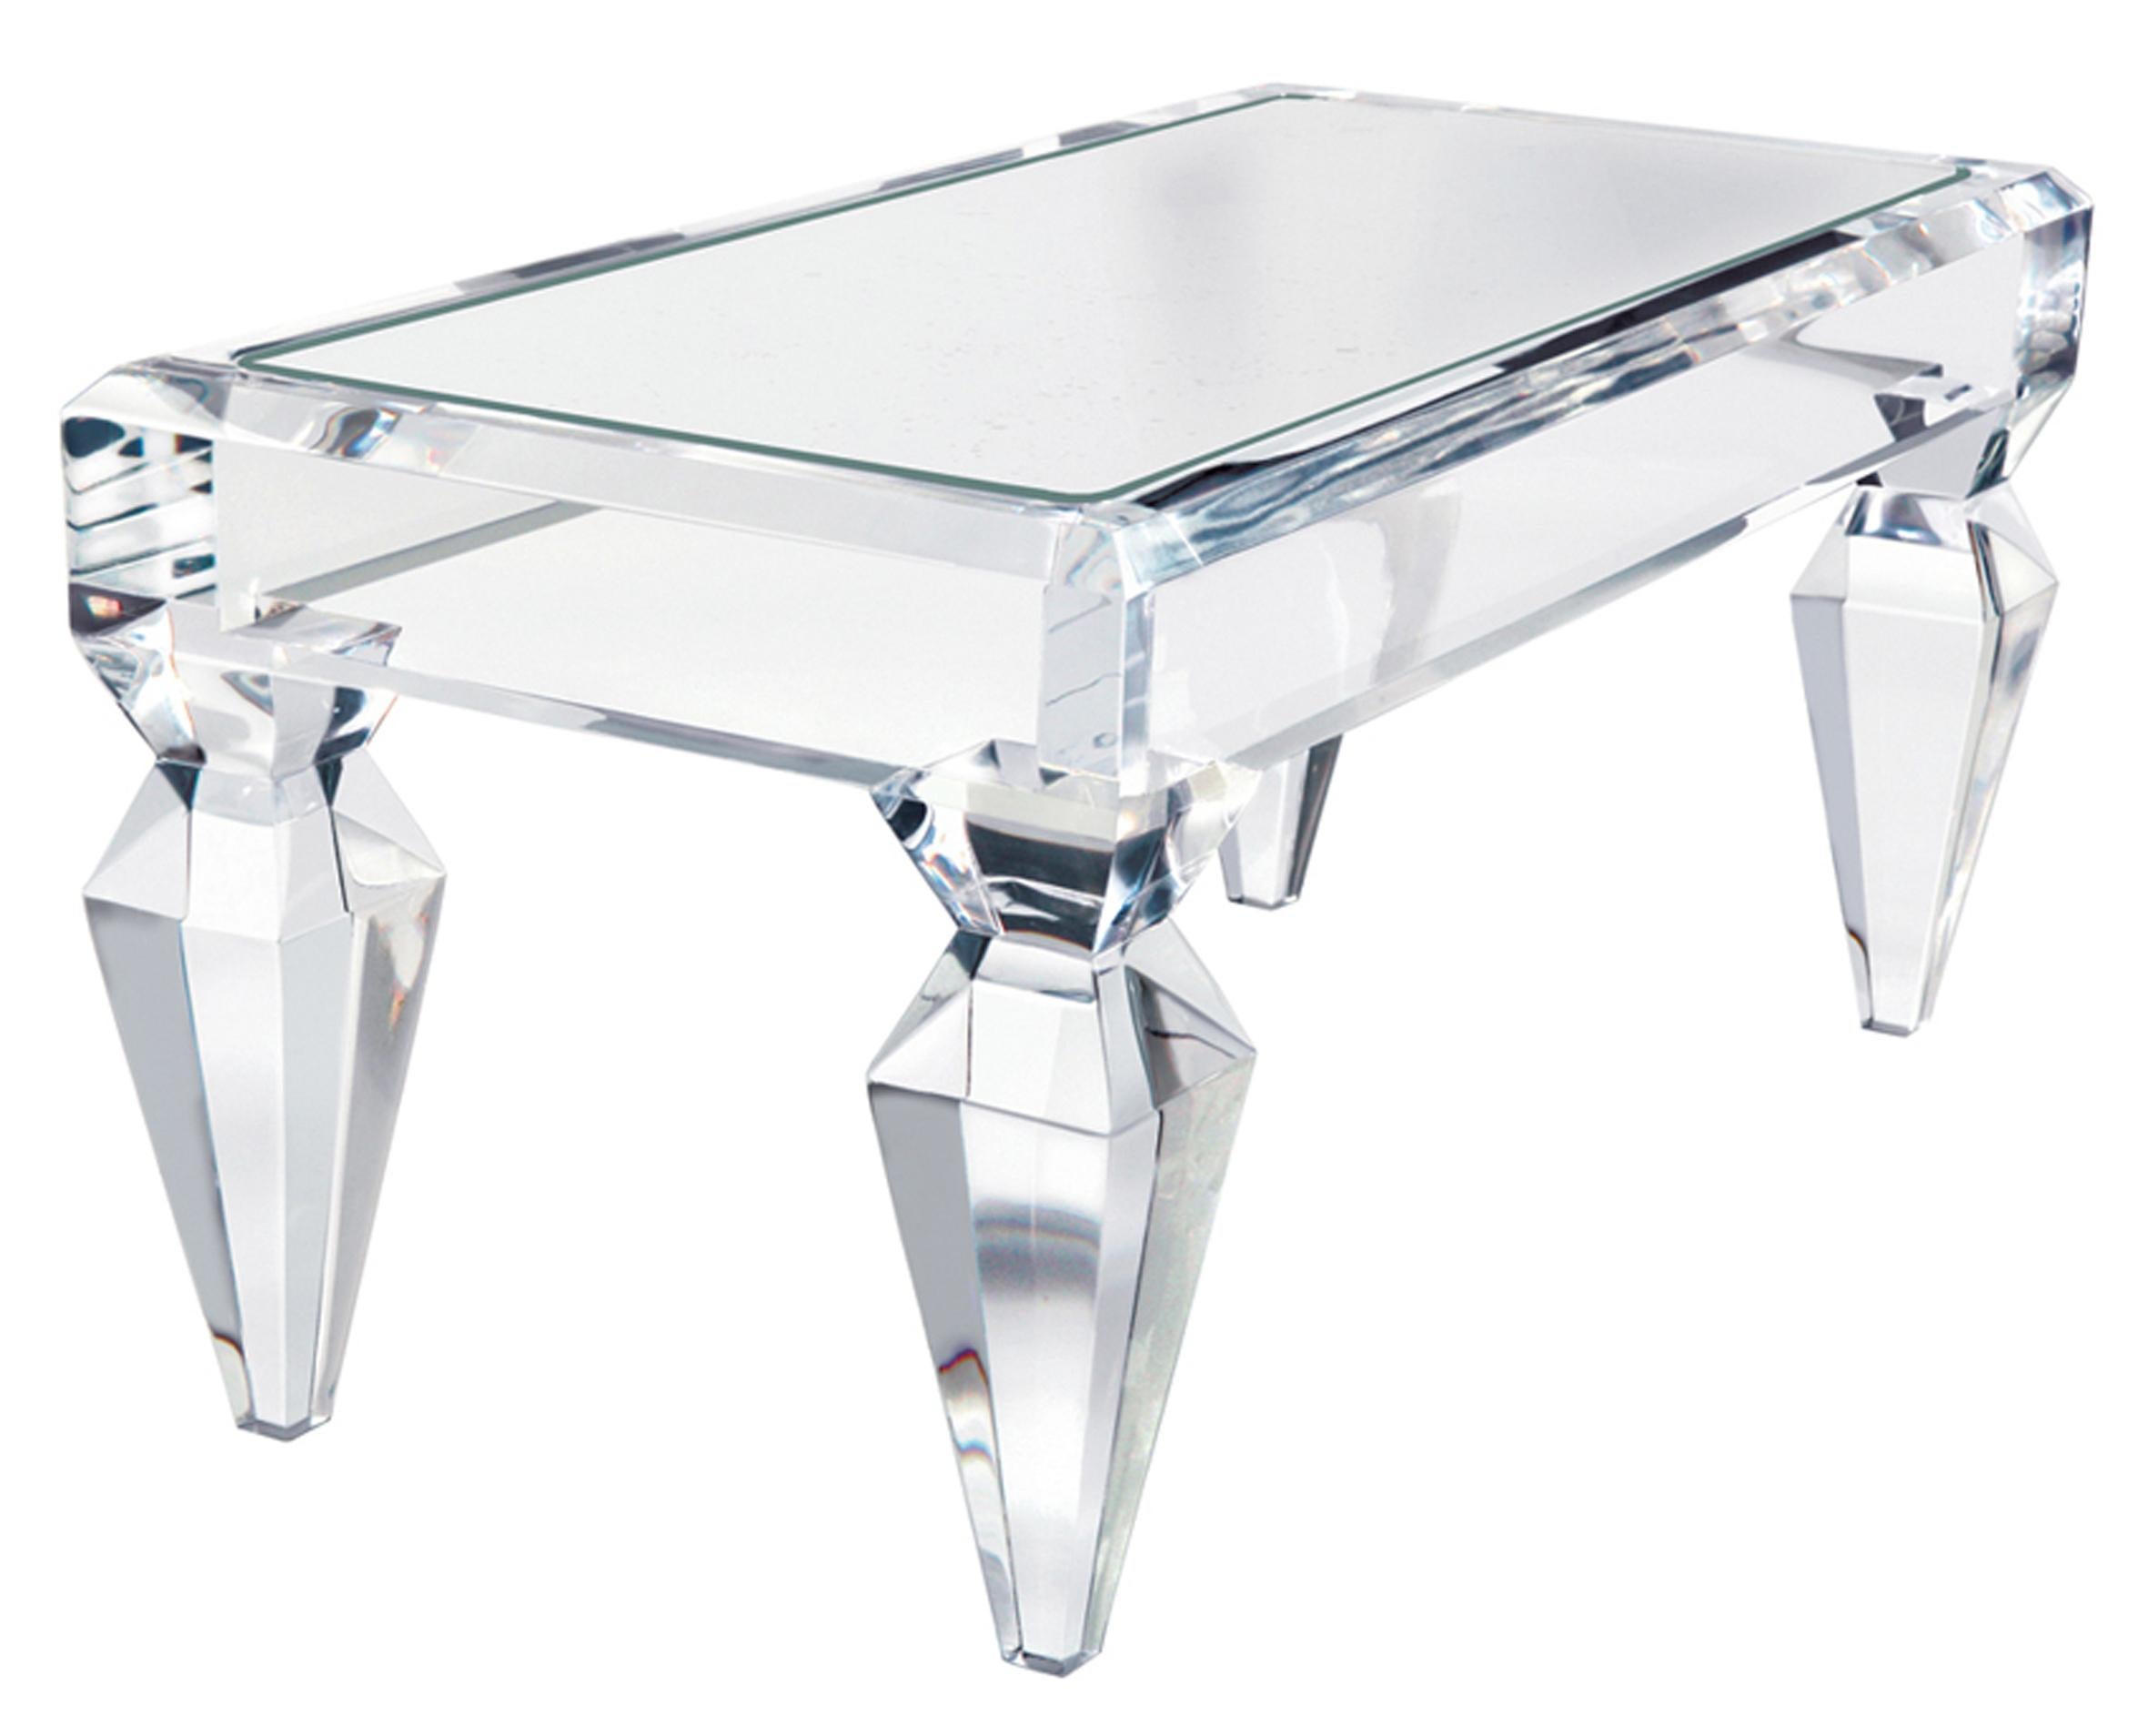 American Lucere Lucite Table With Mirrored Drawer By Craig Van Den Brulle For Sale